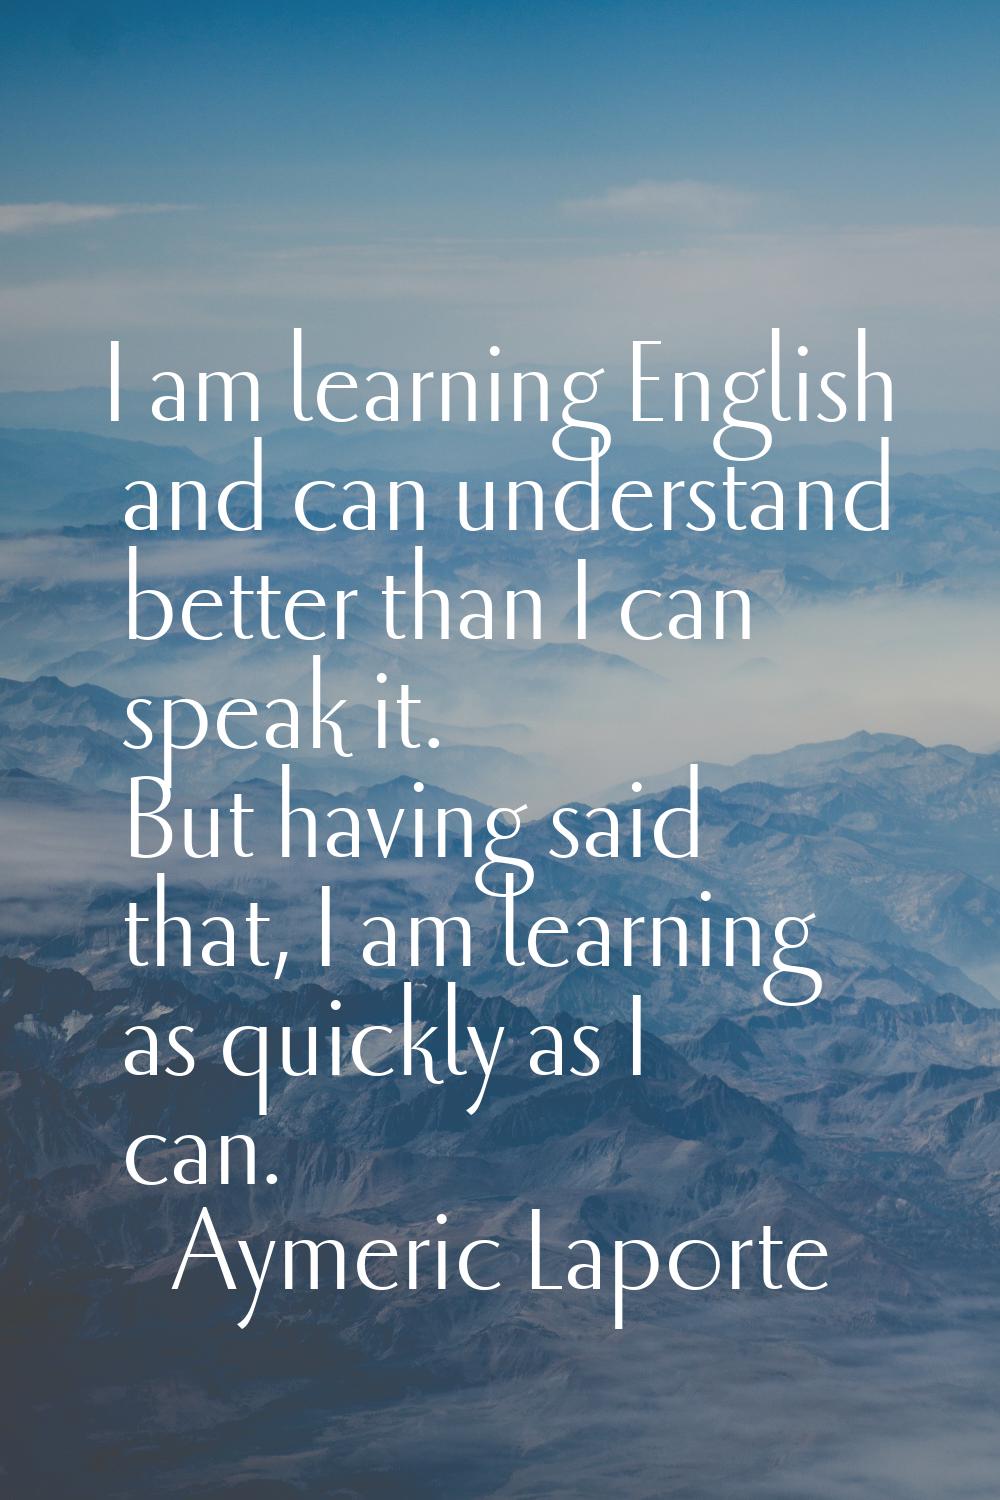 I am learning English and can understand better than I can speak it. But having said that, I am lea